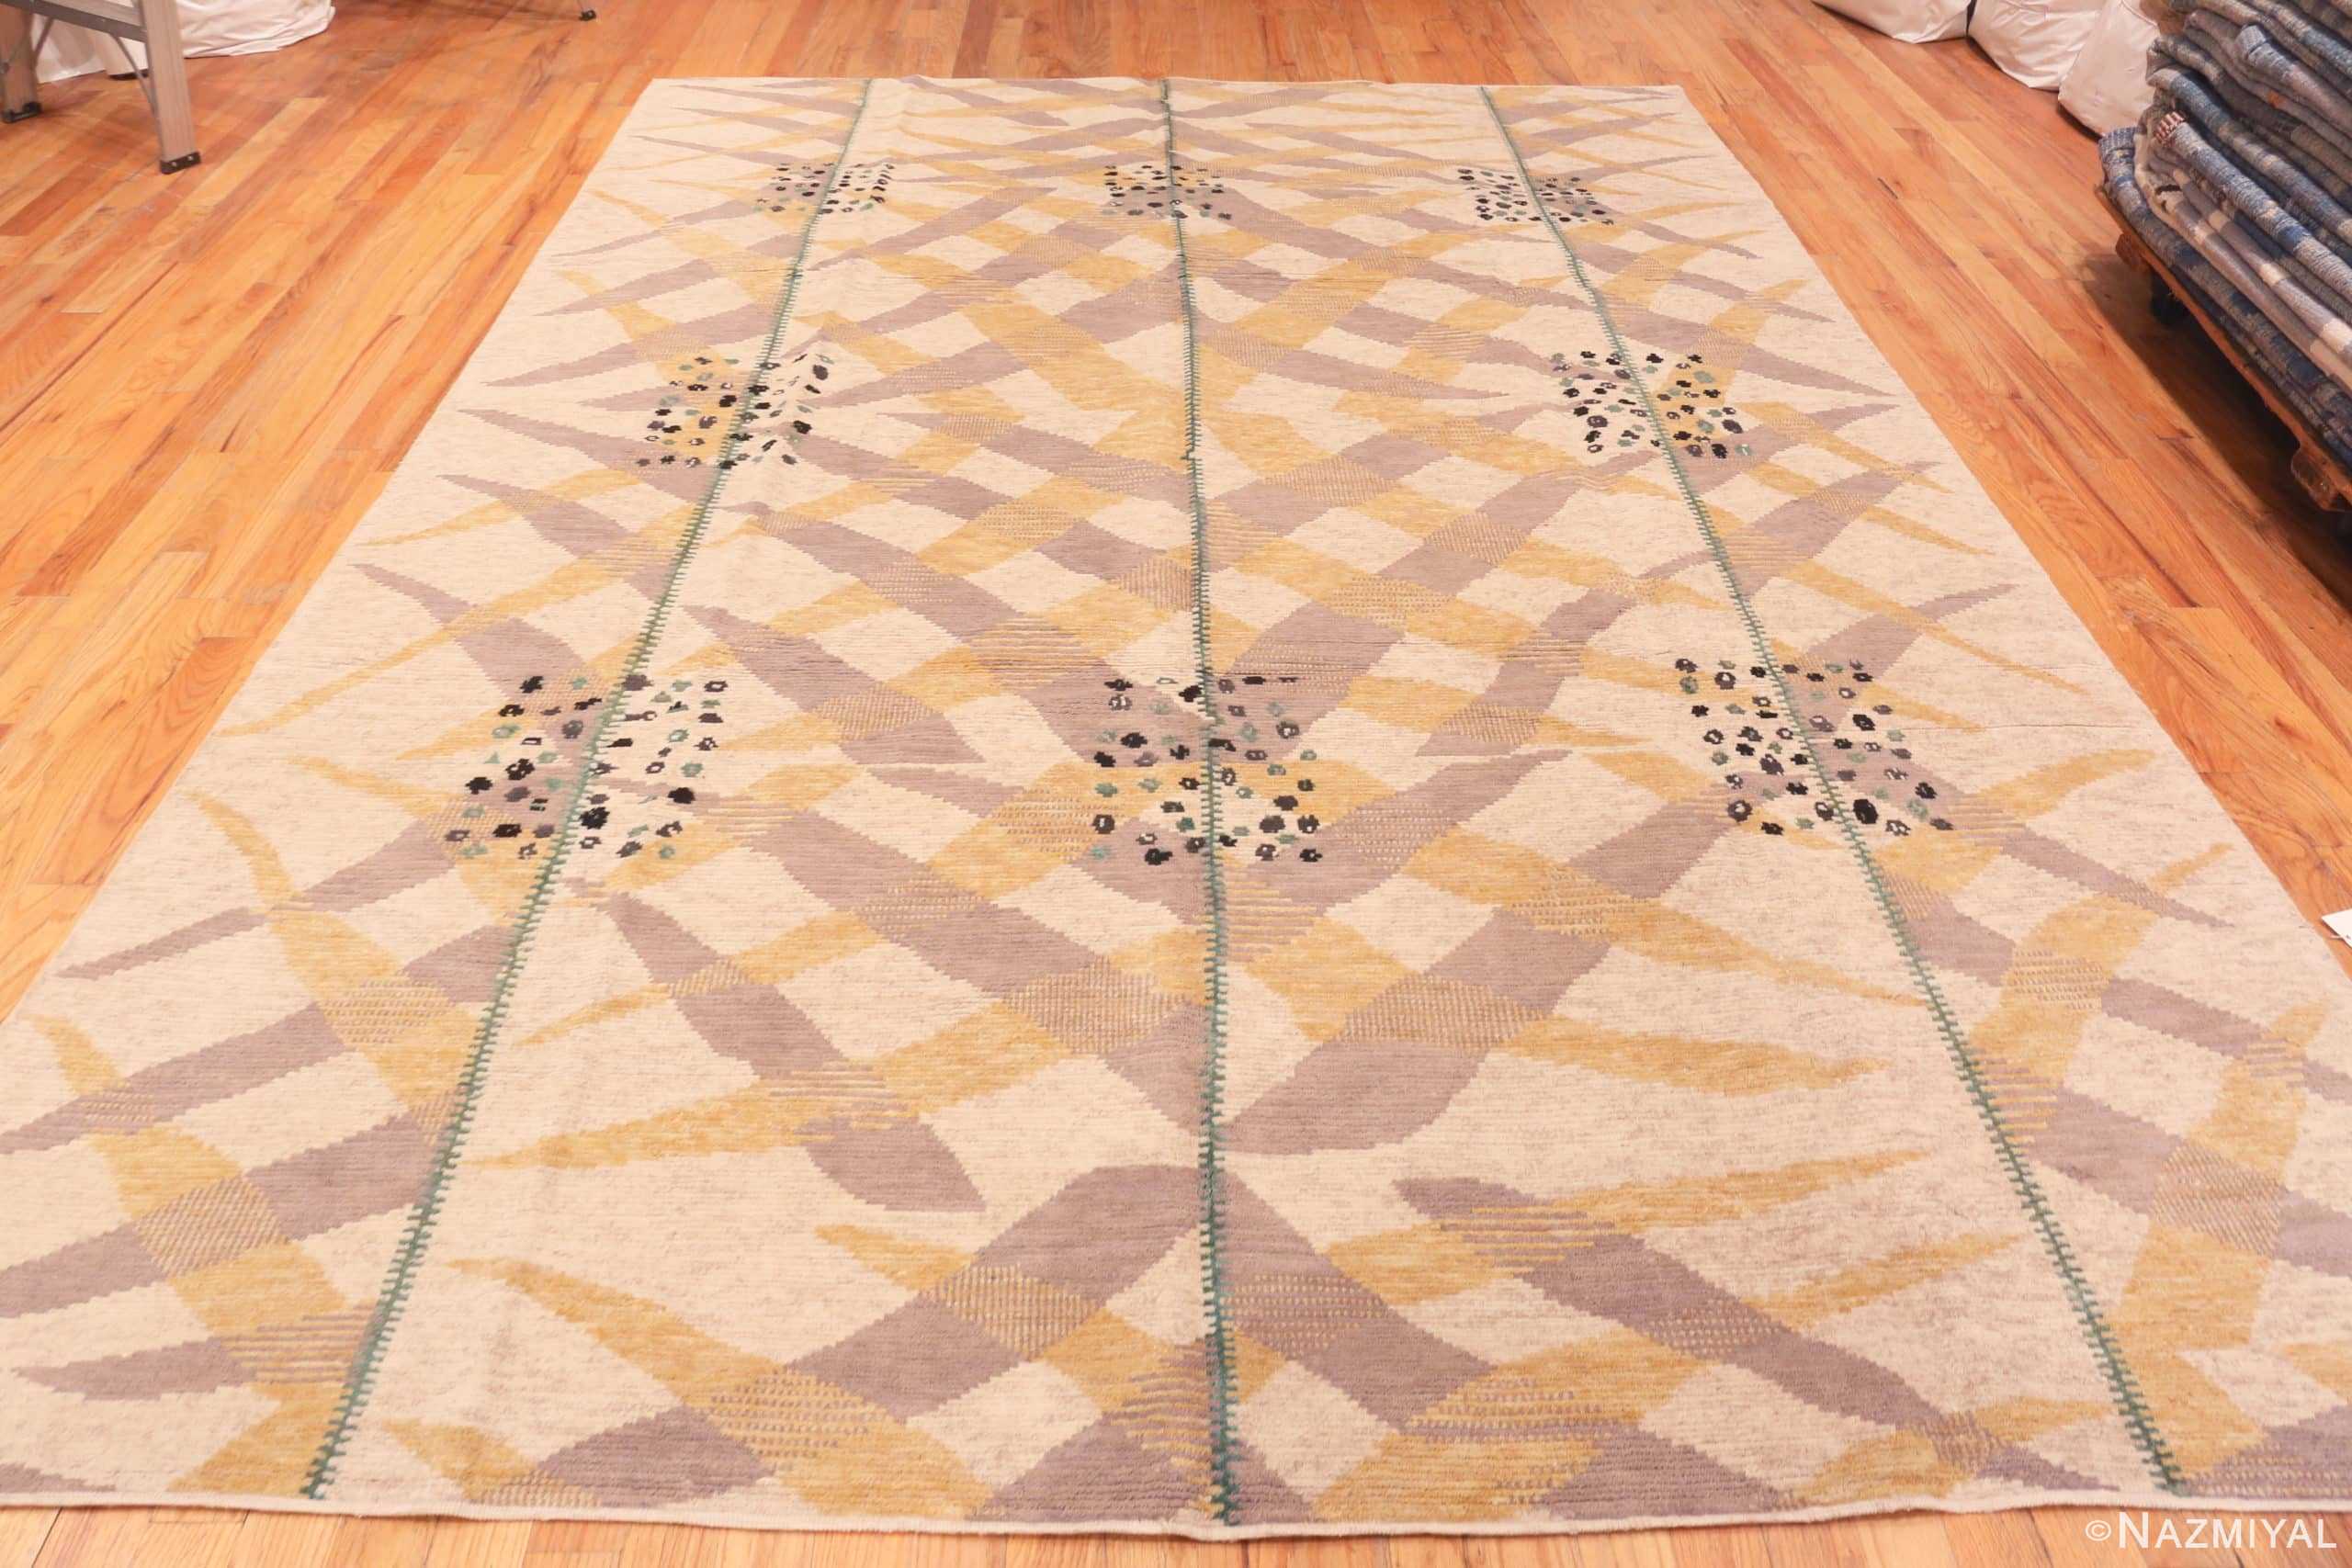 Details Of Beige Silk And Wool Modern Swedish Style Pile Area Rug 60900 by Nazmiyal Antique Rugs